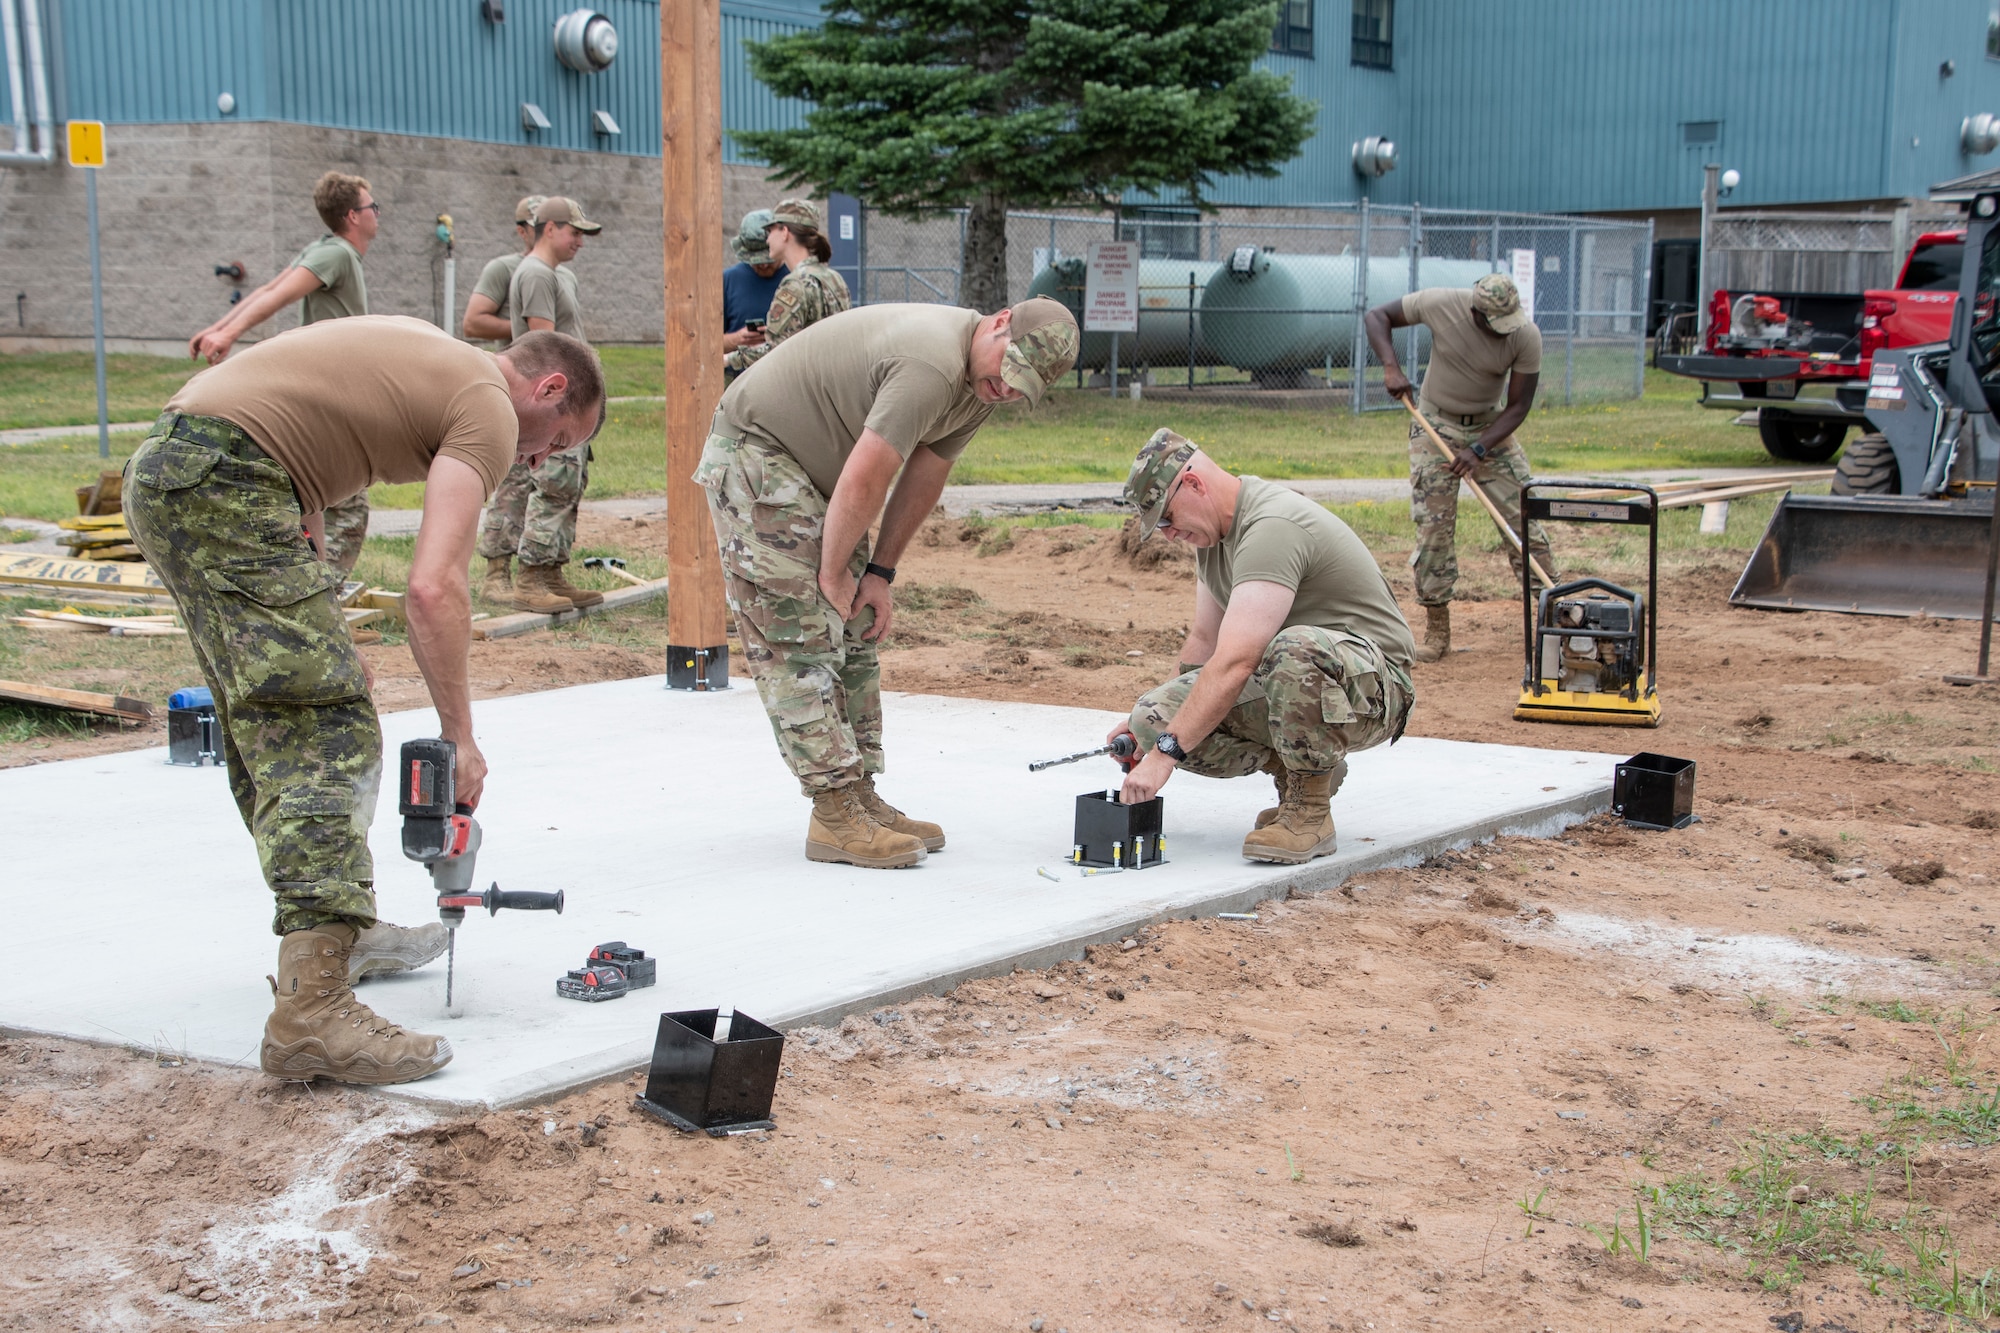 U.S. Air National Guard members with the 131st Bomb Wing and members of the Royal Canadian Air Force (RCAF), work in teams to complete various projects at 14 Wing Royal Canadian Air Force Base in Greenwood, Canada, July 19, 2022. Members with the 131st Bomb Wing’s 231st Civil Engineer Squadron, 200th REDHORSE Squadron and the 239th Combat Communications Squadron, deployed to Nova Scotia as part of the Construction Engineering Project Exchange Program with the 14 Wing of the RCAF. These Guard members worked in cooperation with the RCAF to complete quality of life improvements to the base, to build on skillsets and to strengthen interoperability with Canadian allies. (U.S. Air National Guard photo by Airman 1st Class Kelly C. Ferguson)